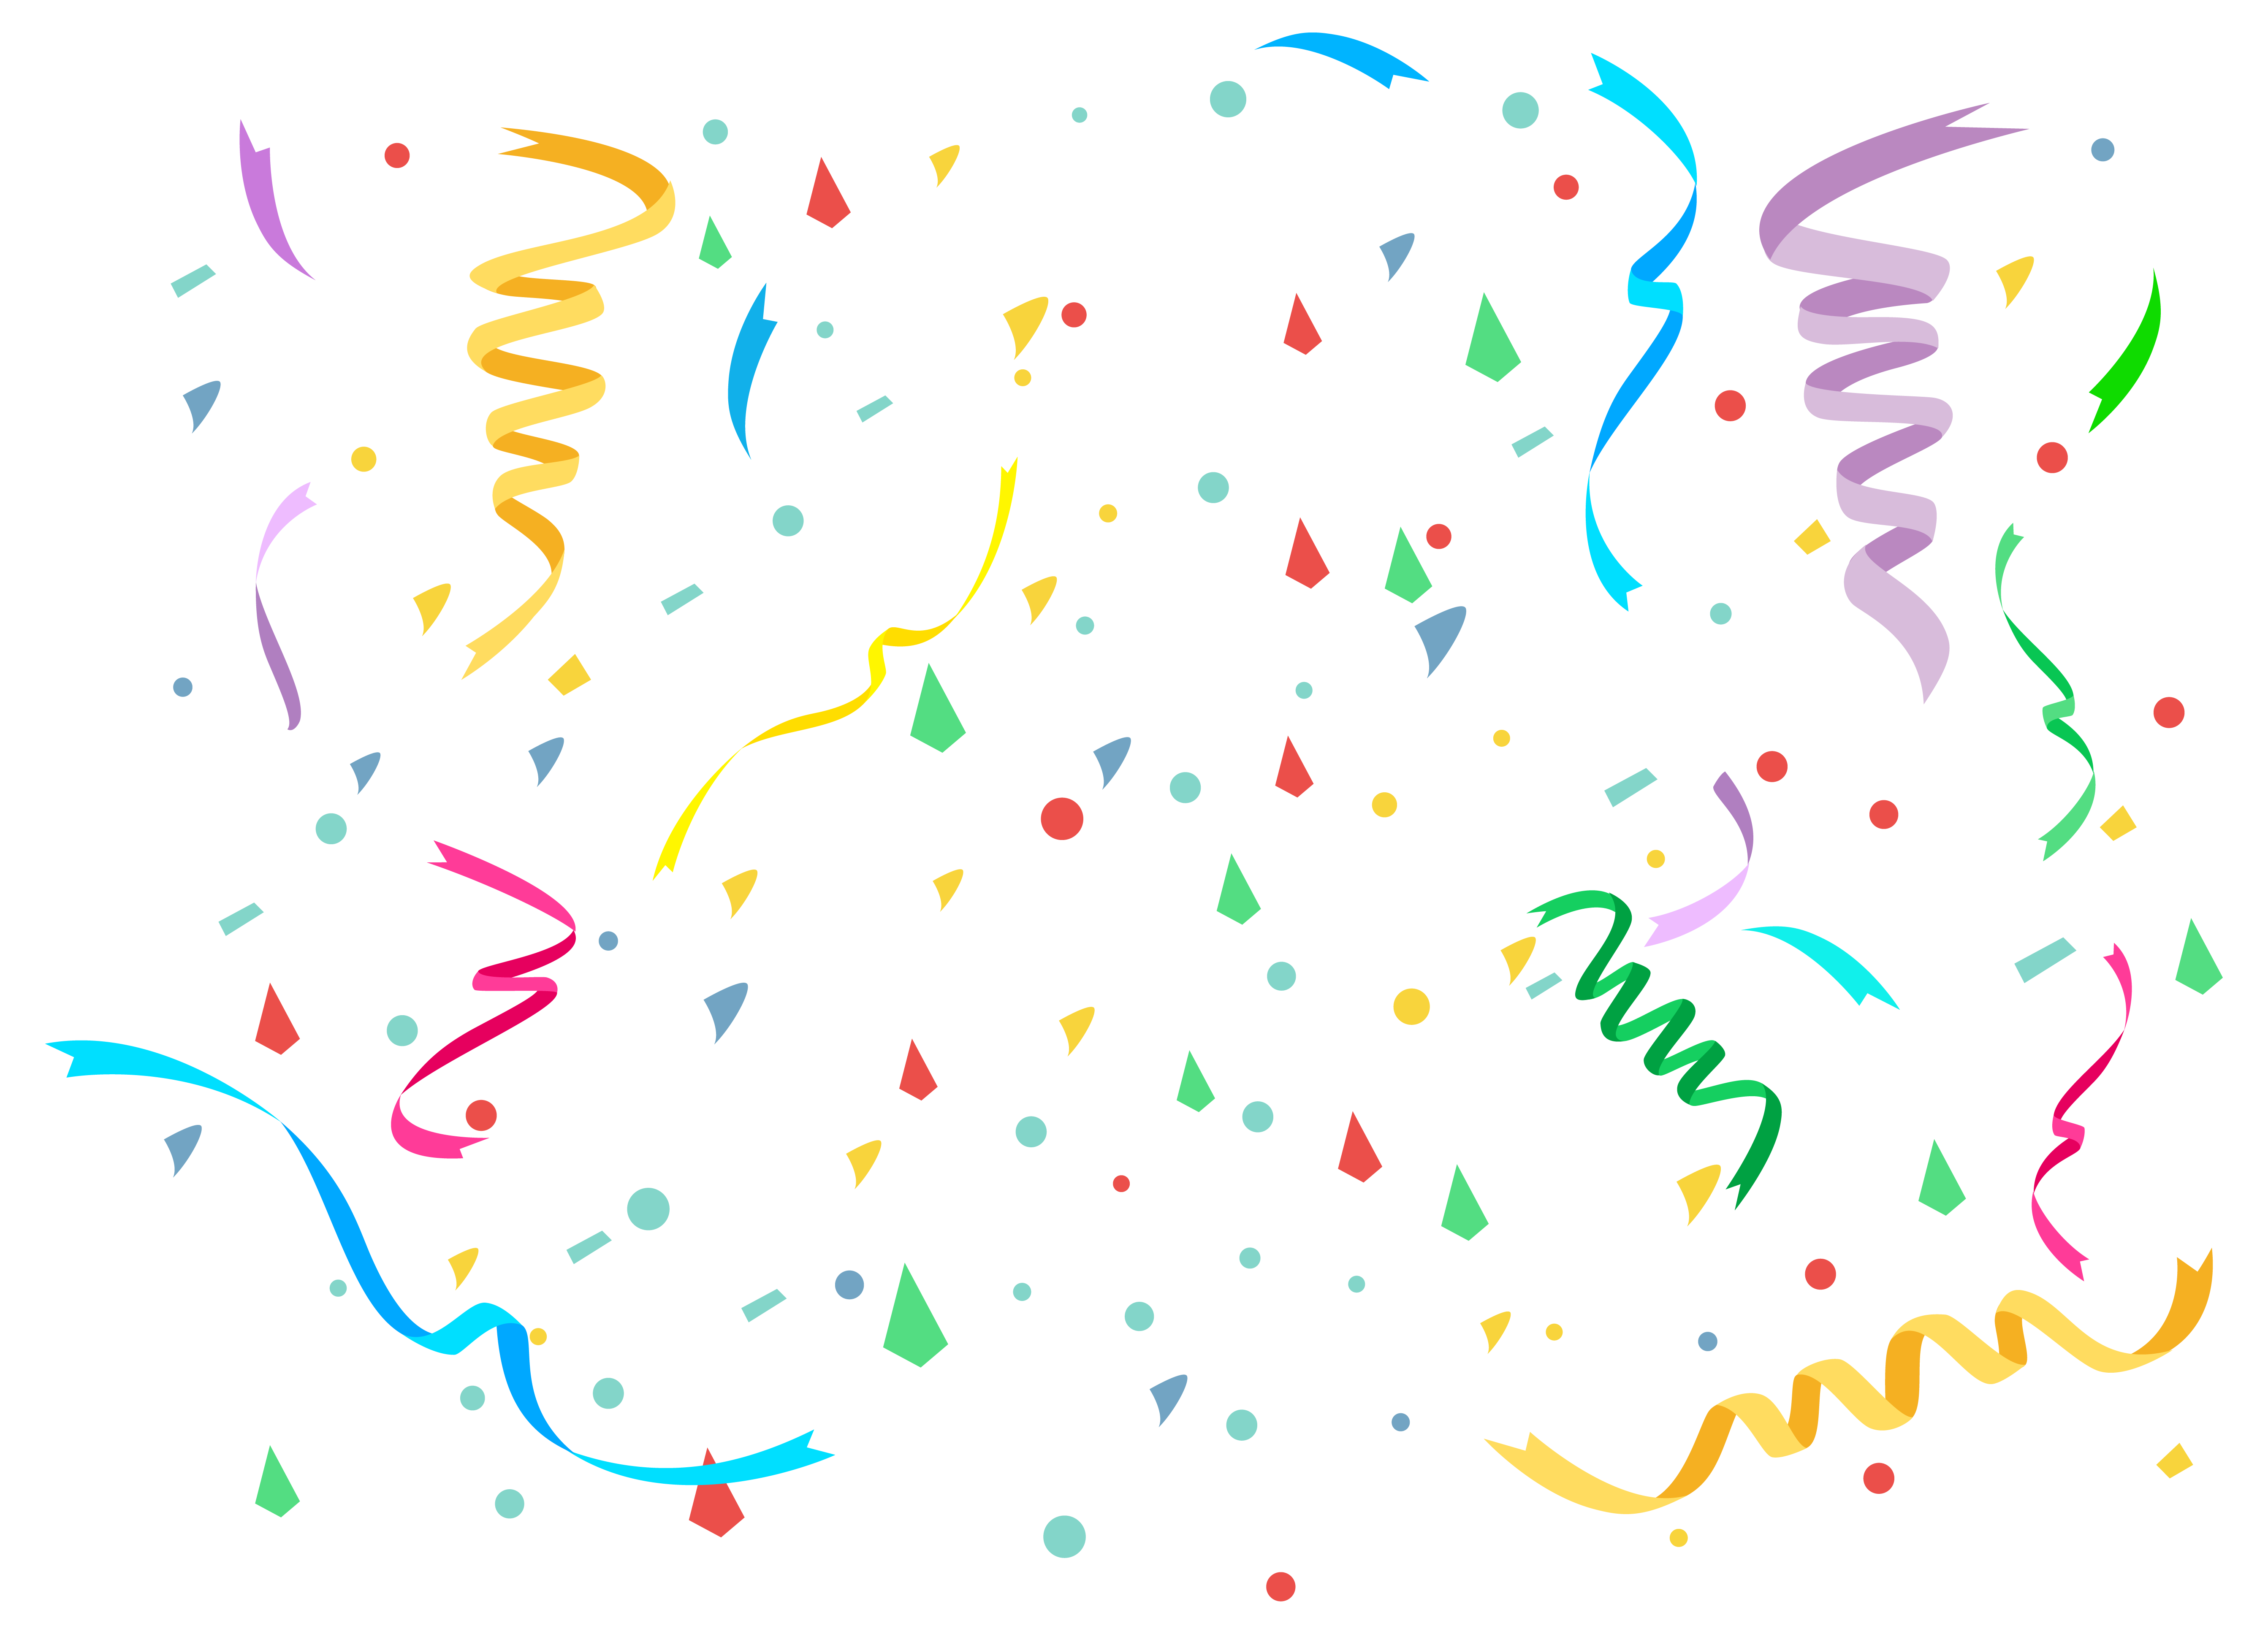 Related image cool amusing. Confetti vector png